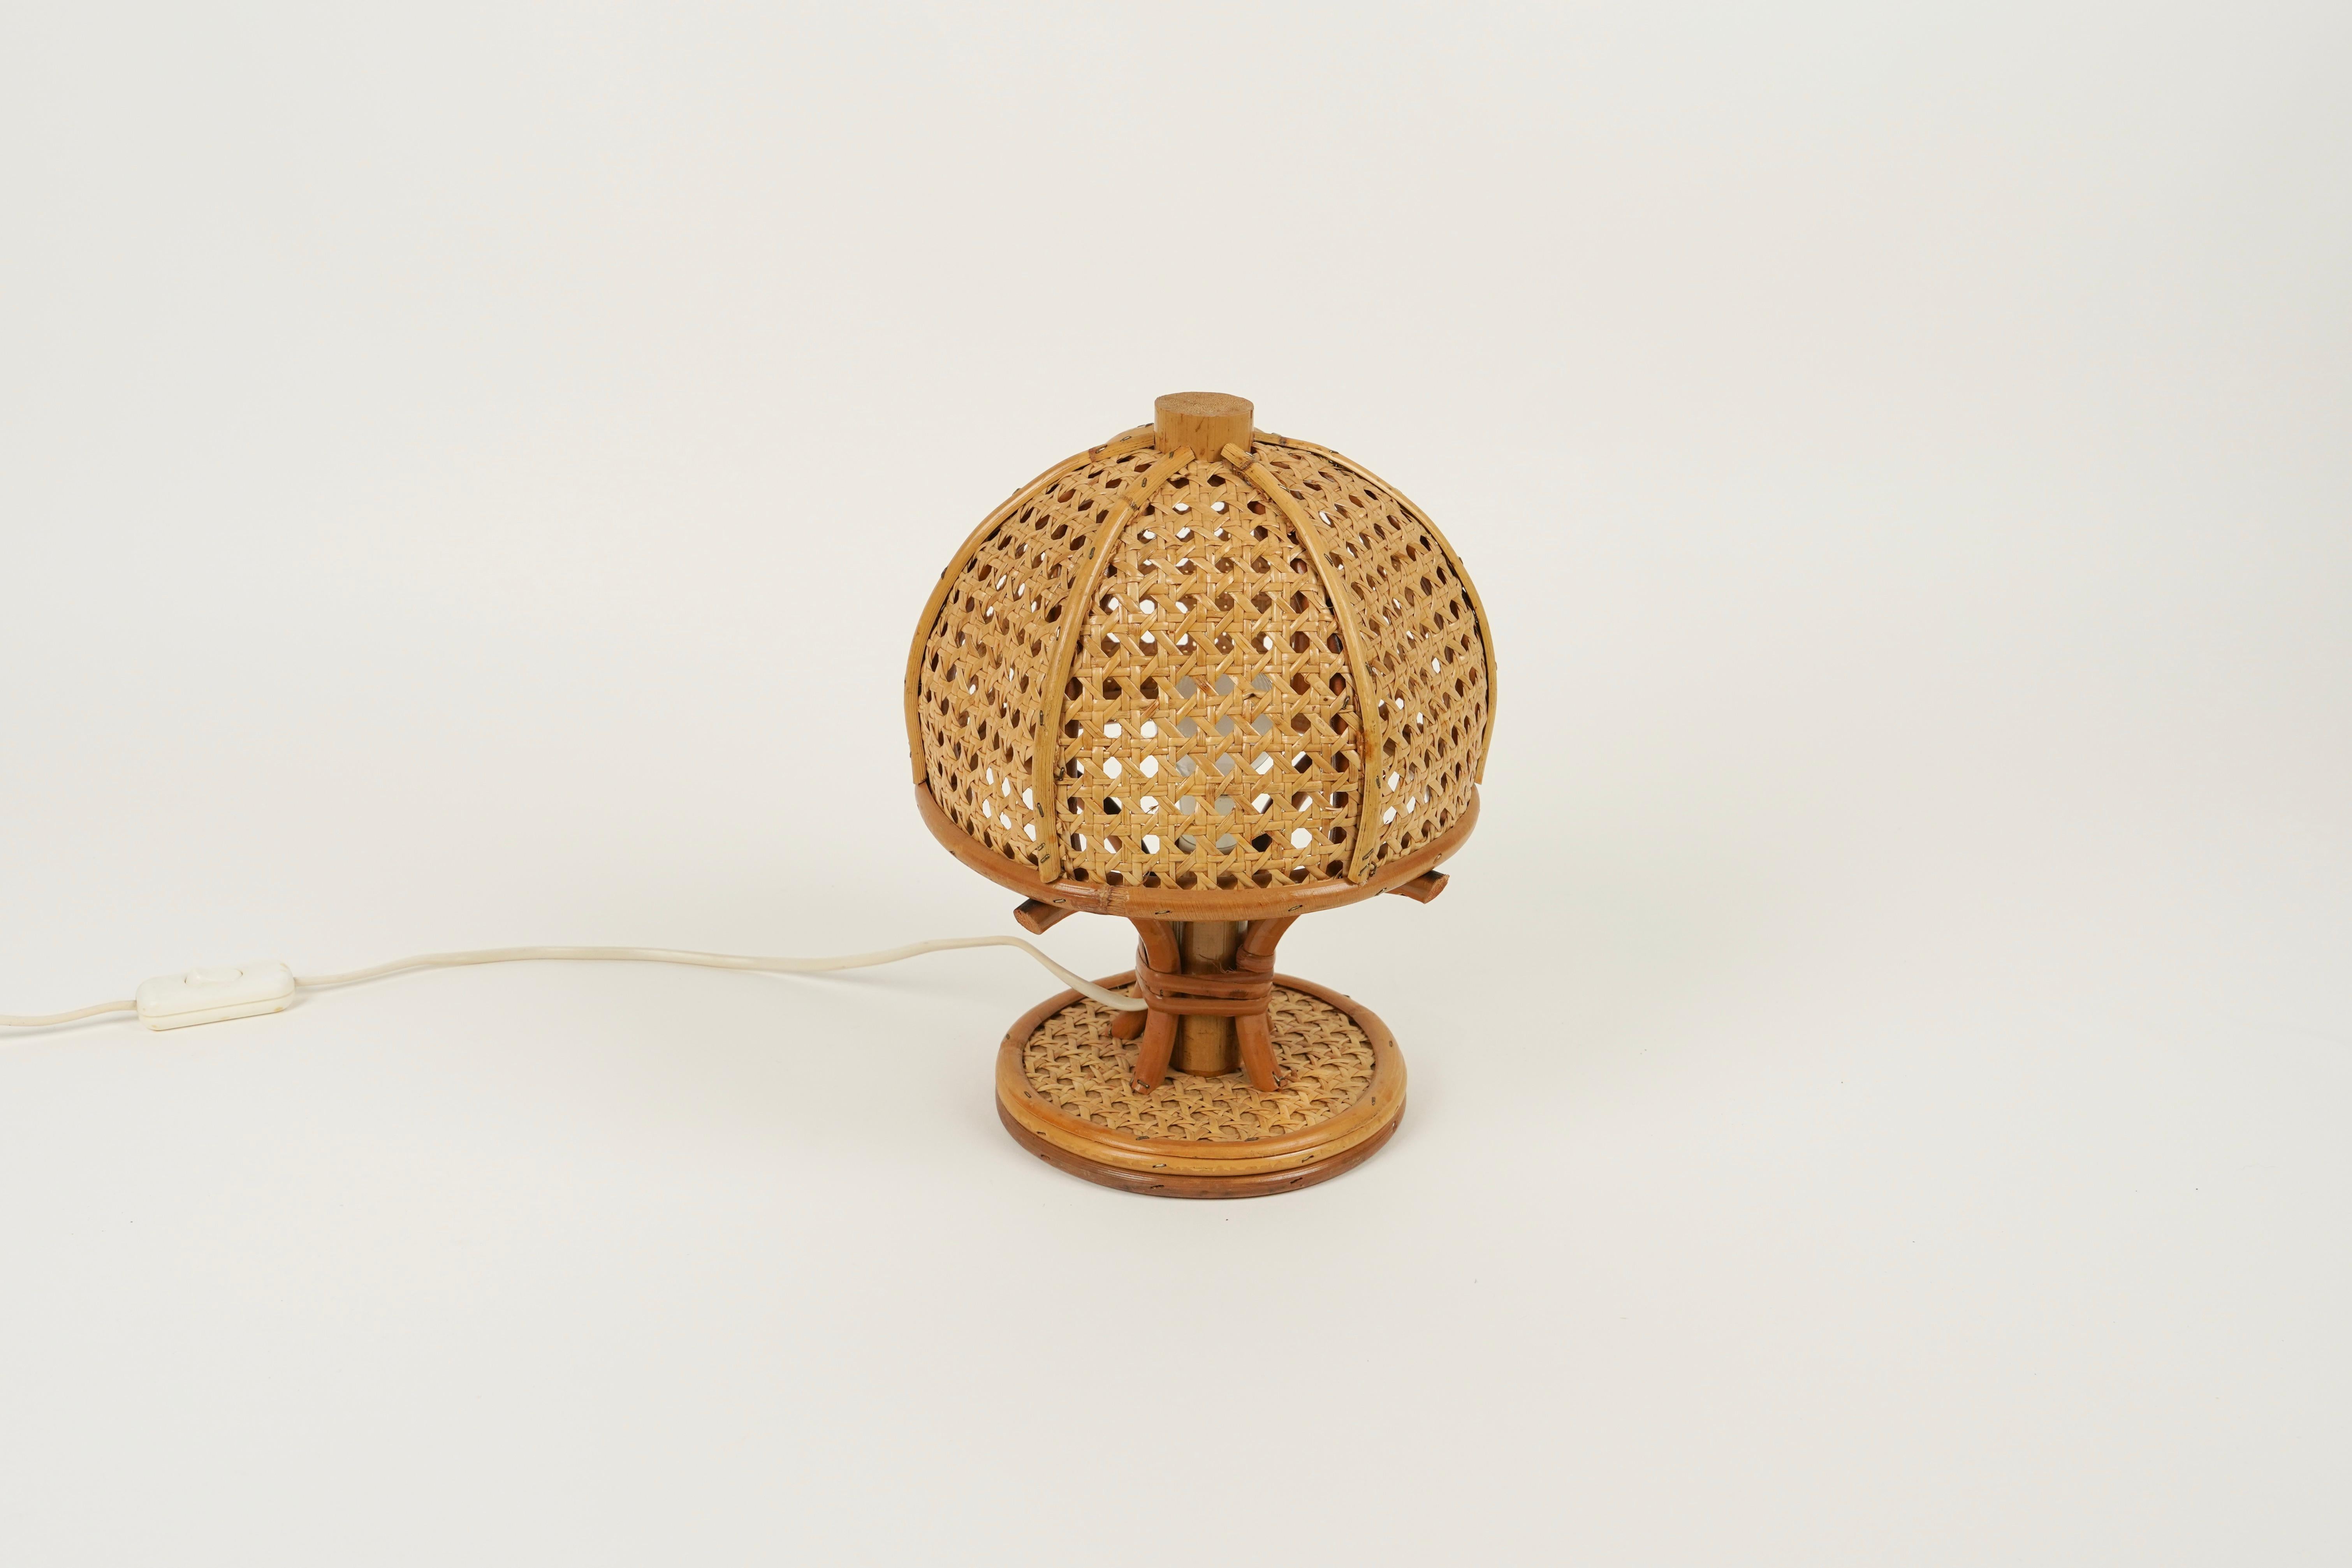 Italian Midcentury Bamboo and Rattan Table Lamp Louis Sognot Style, Italy, 1970s For Sale